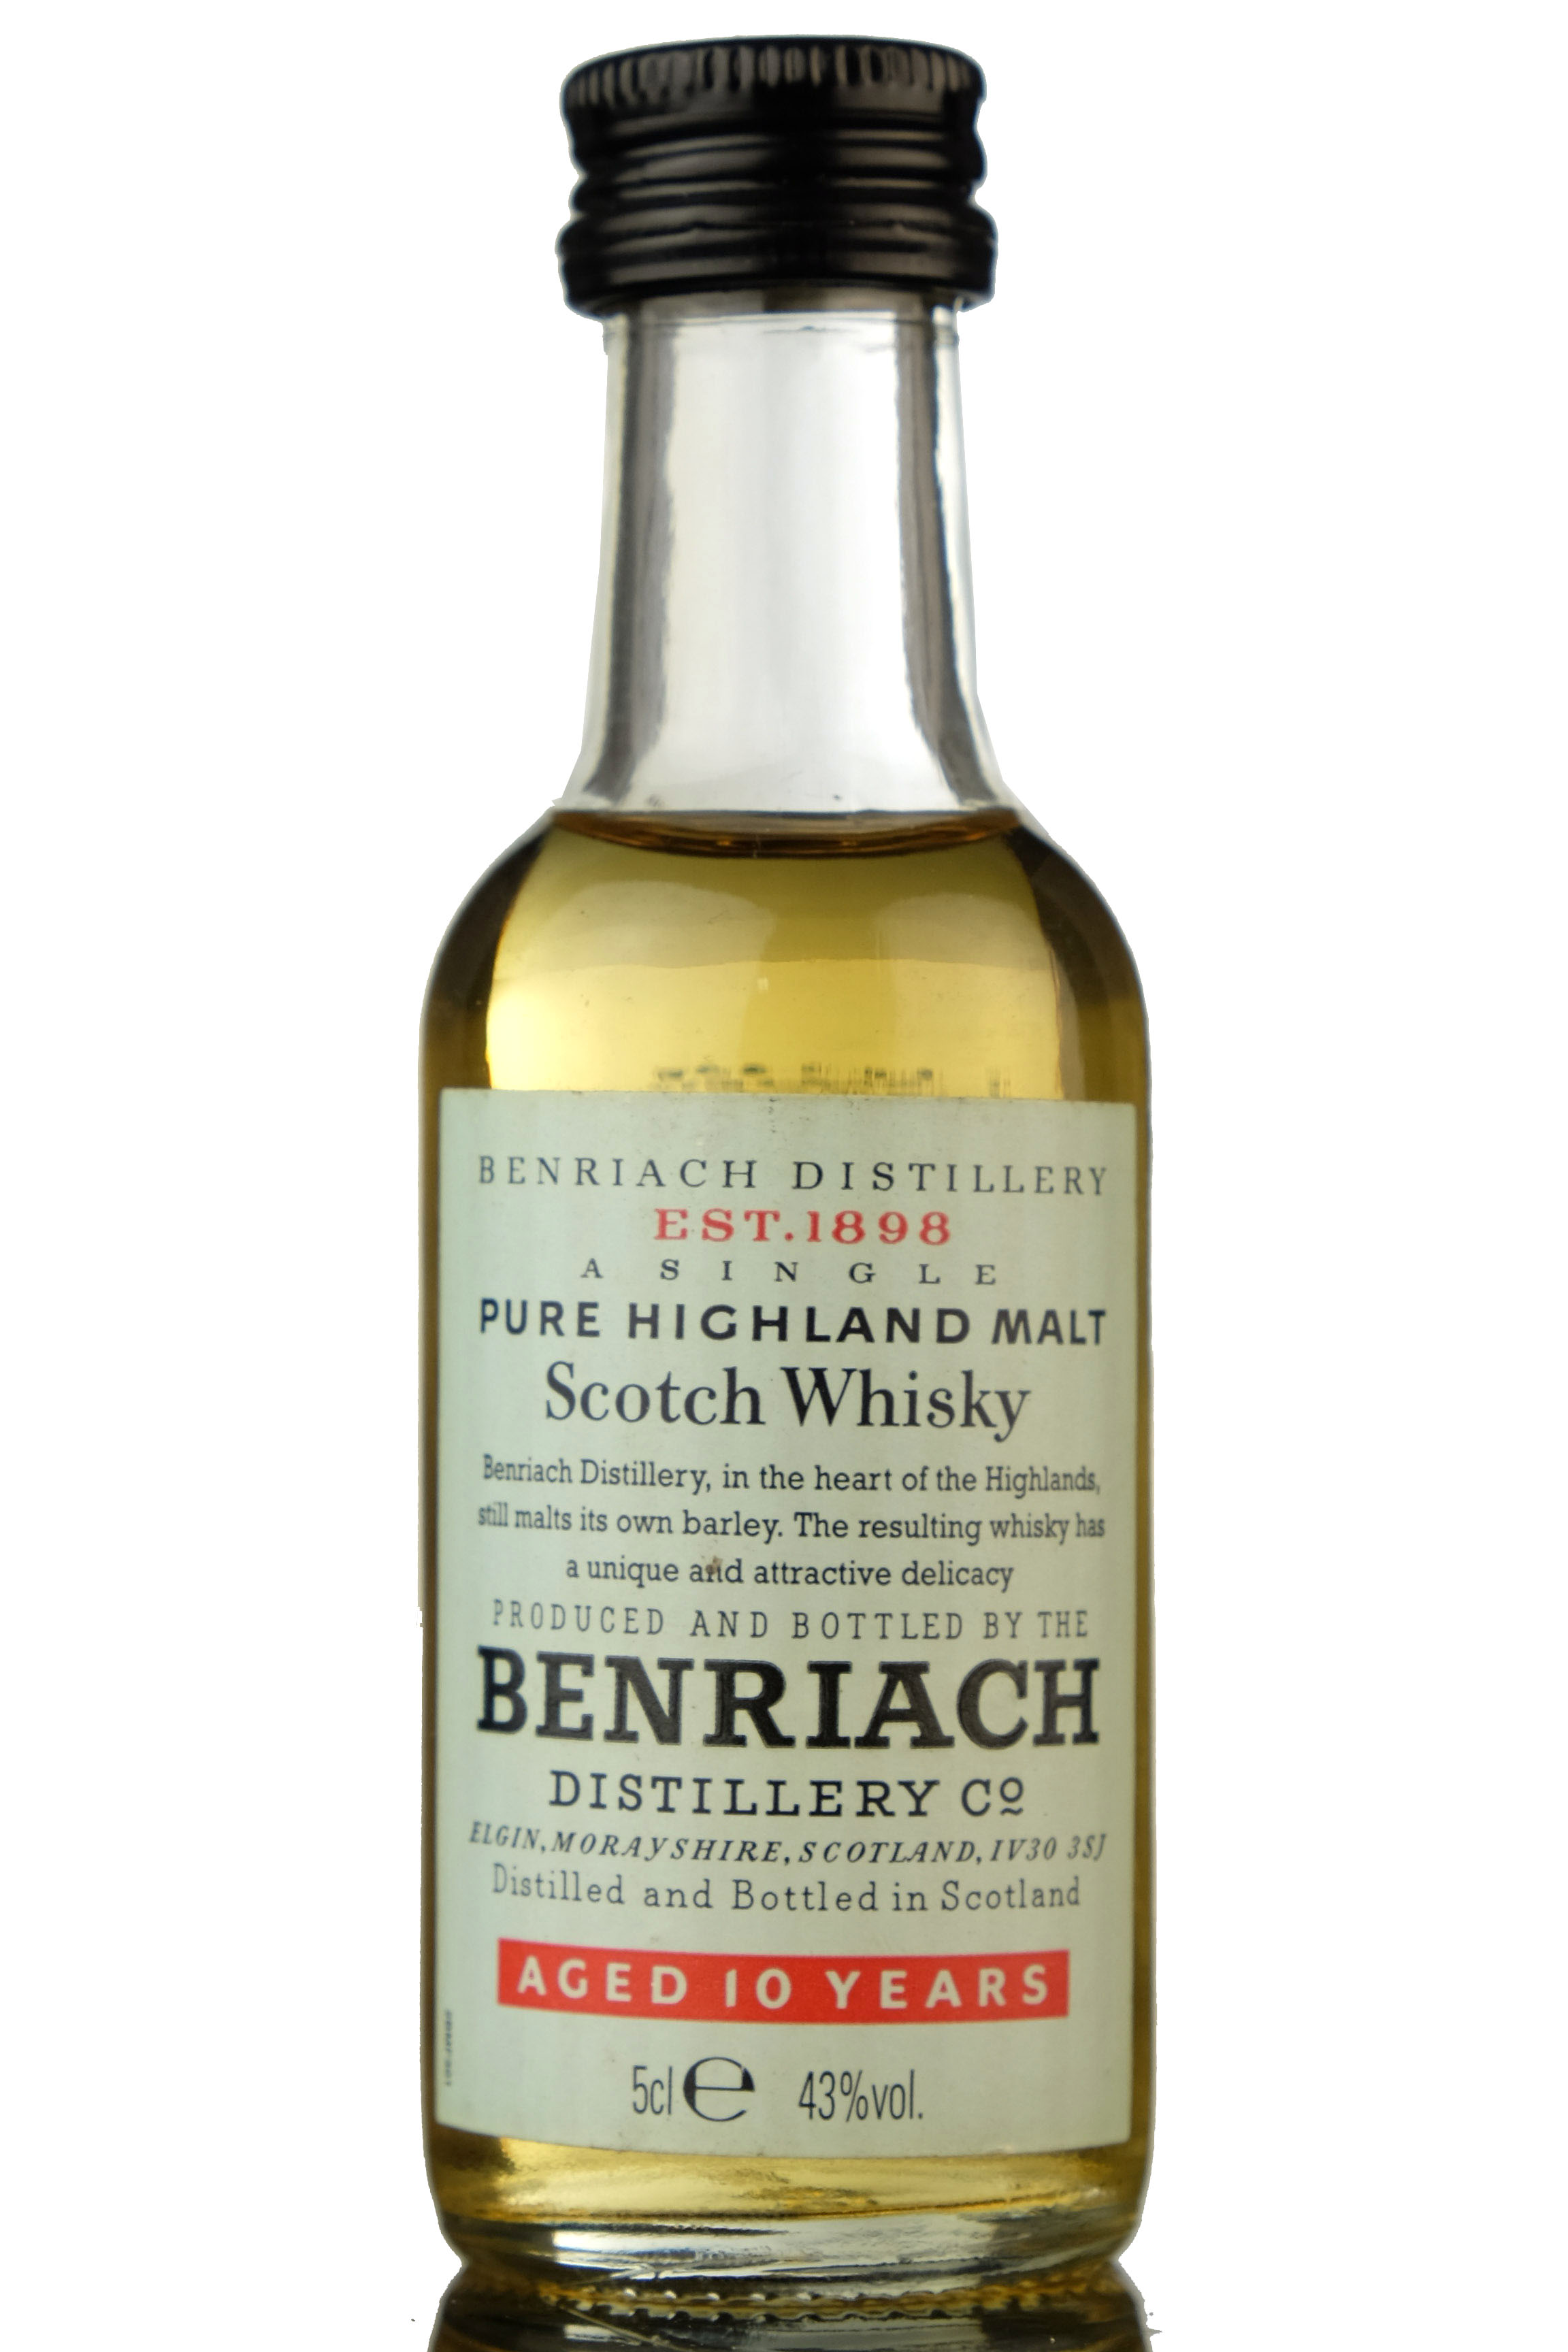 Benriach 10 Year Old Miniature